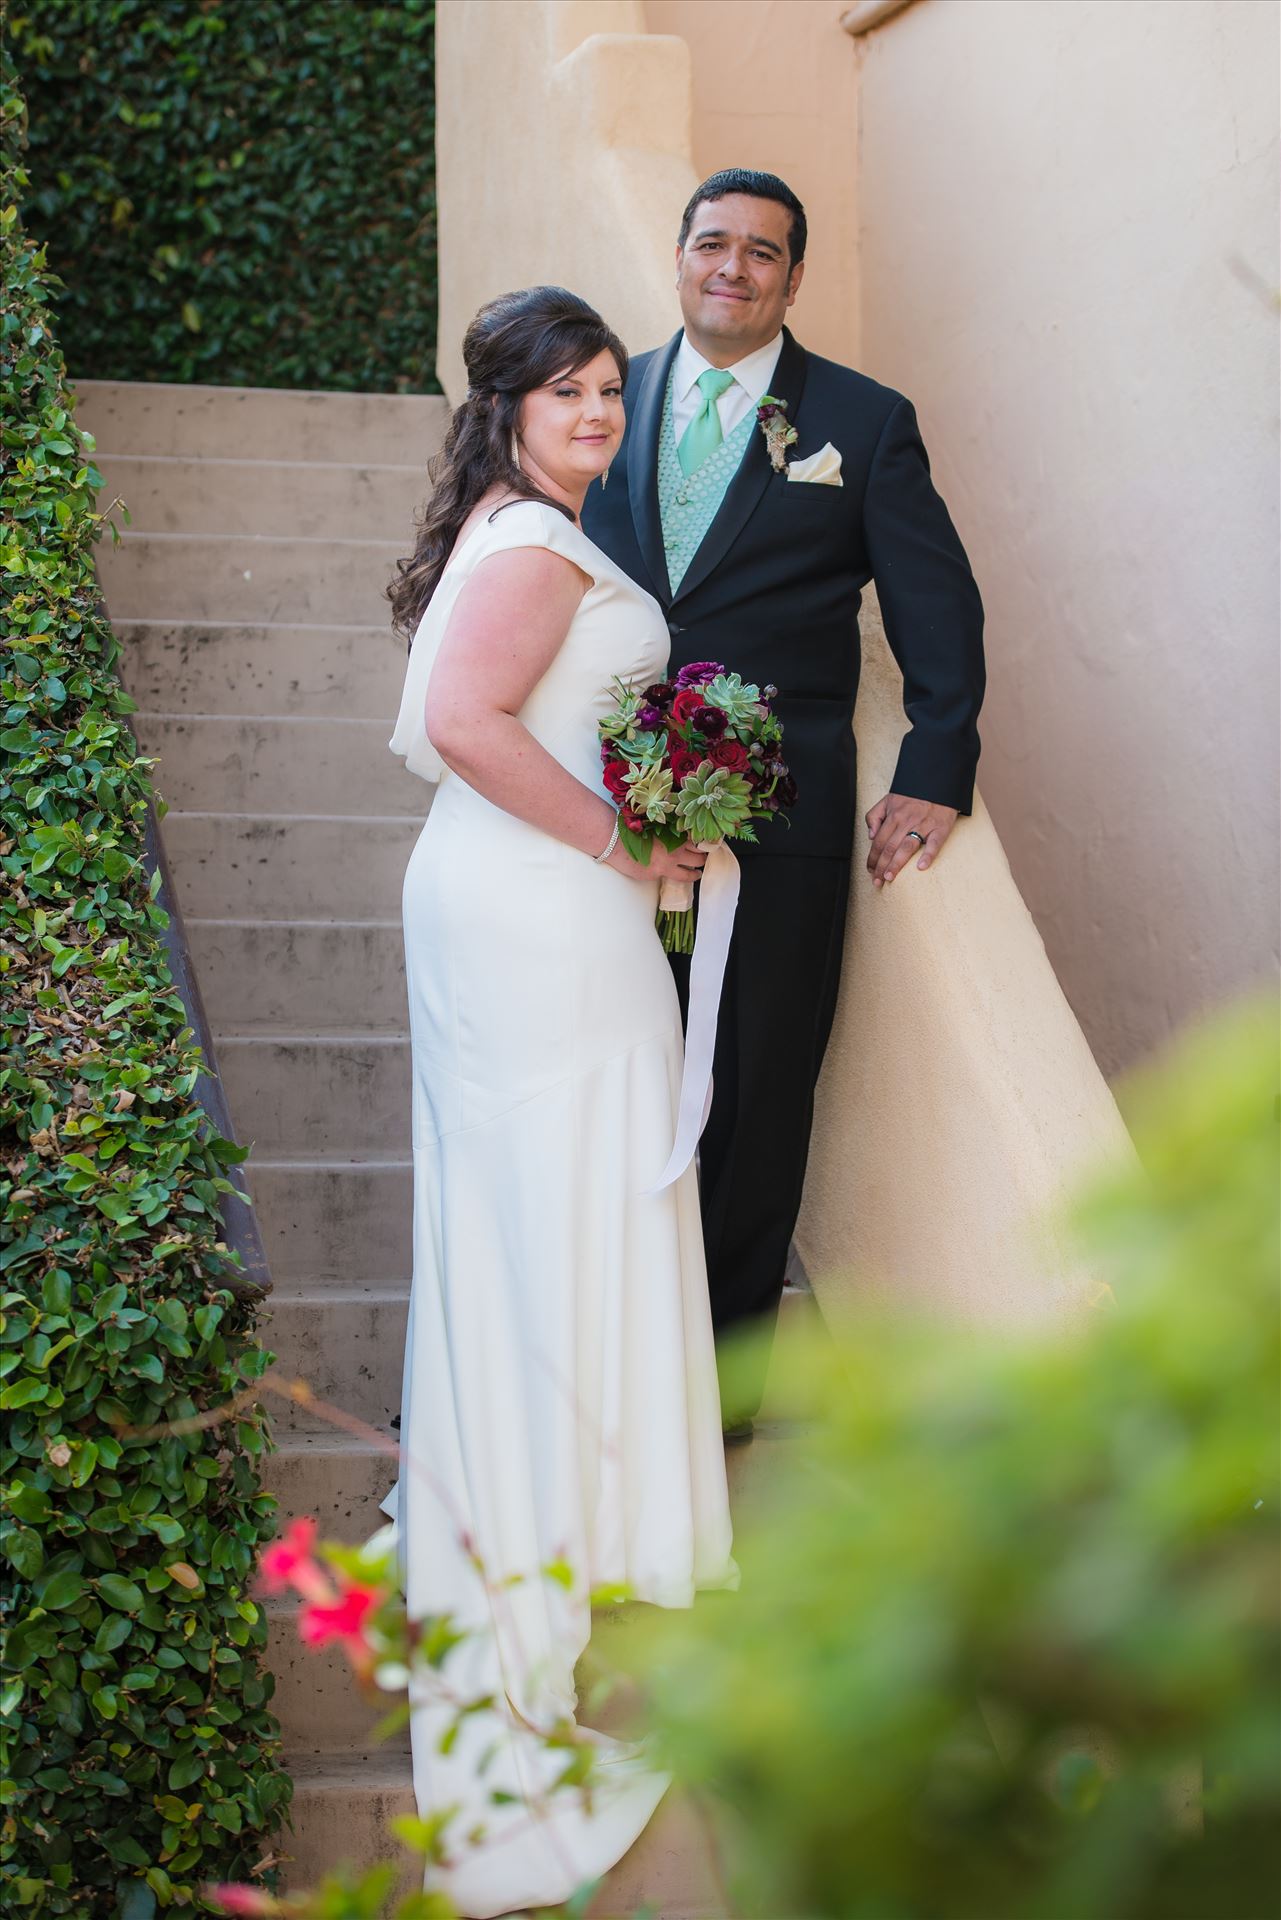 Mary and Alejandro 16 Wedding photography at the Historic Santa Maria Inn in Santa Maria, California by Mirror's Edge Photography. Bride and Groom on the Ivy Staircase after Ceremony. by Sarah Williams